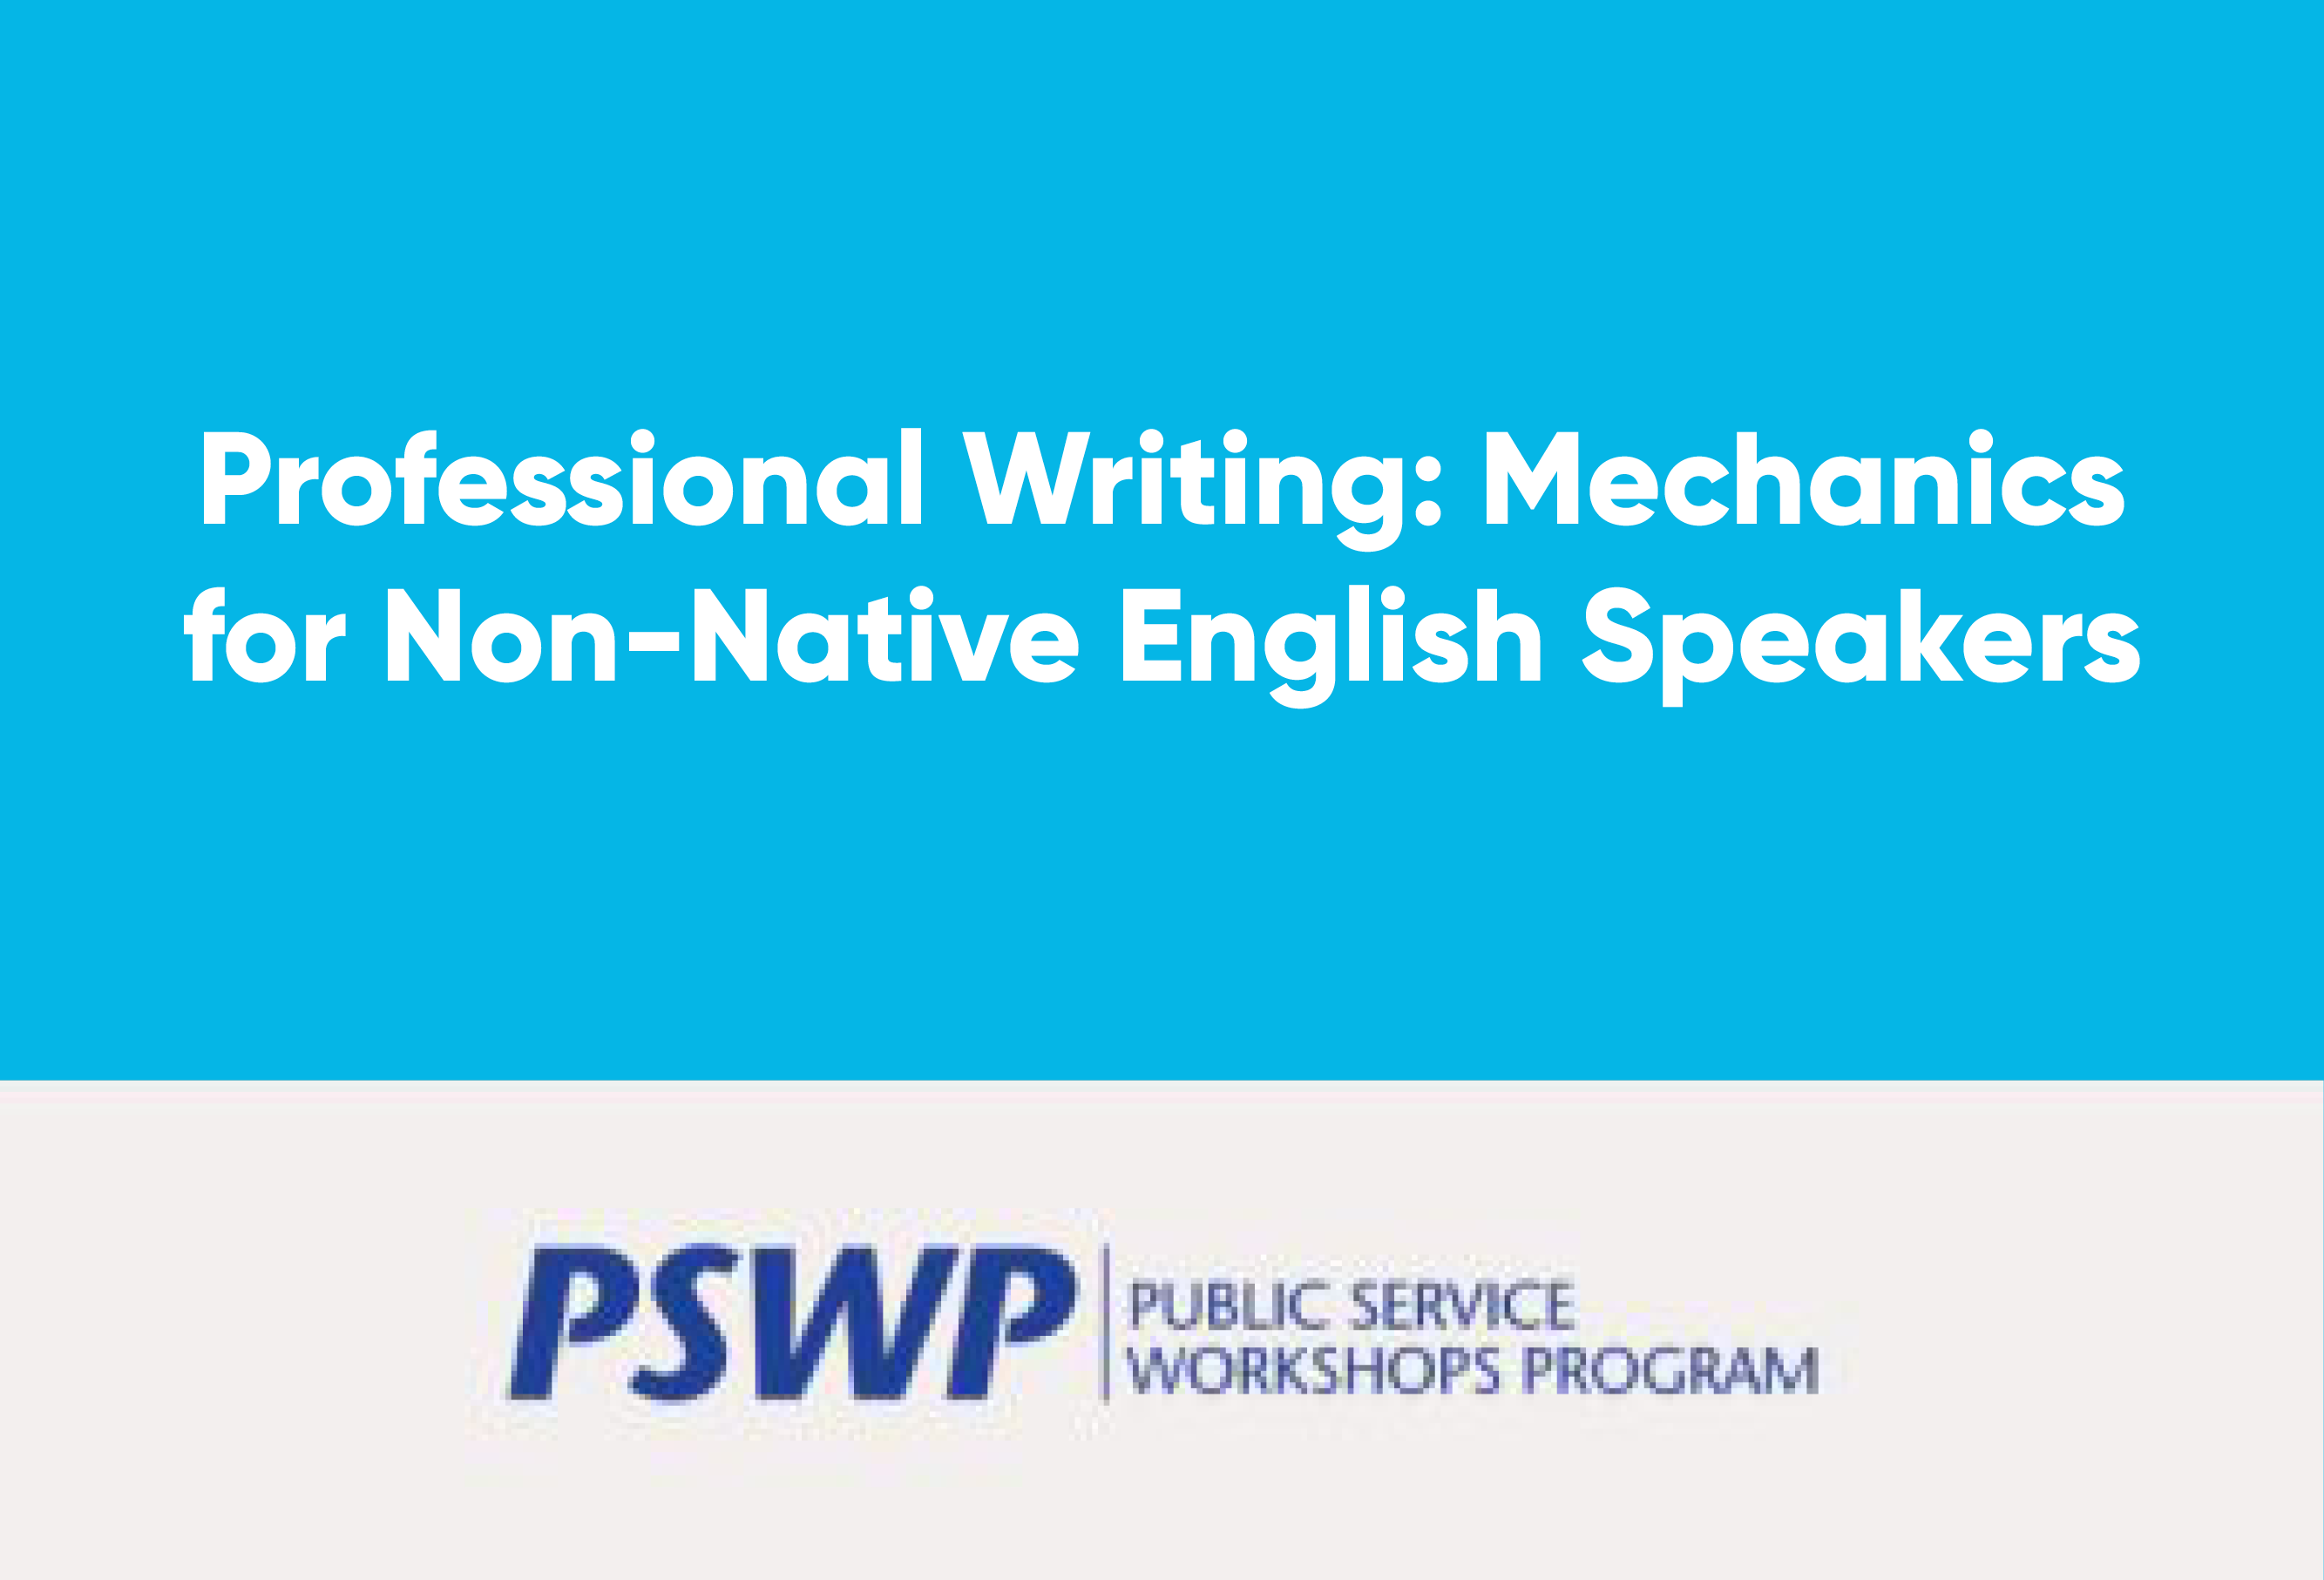 May 14: Professional Writing: Mechanics for Non-Native English Speakers